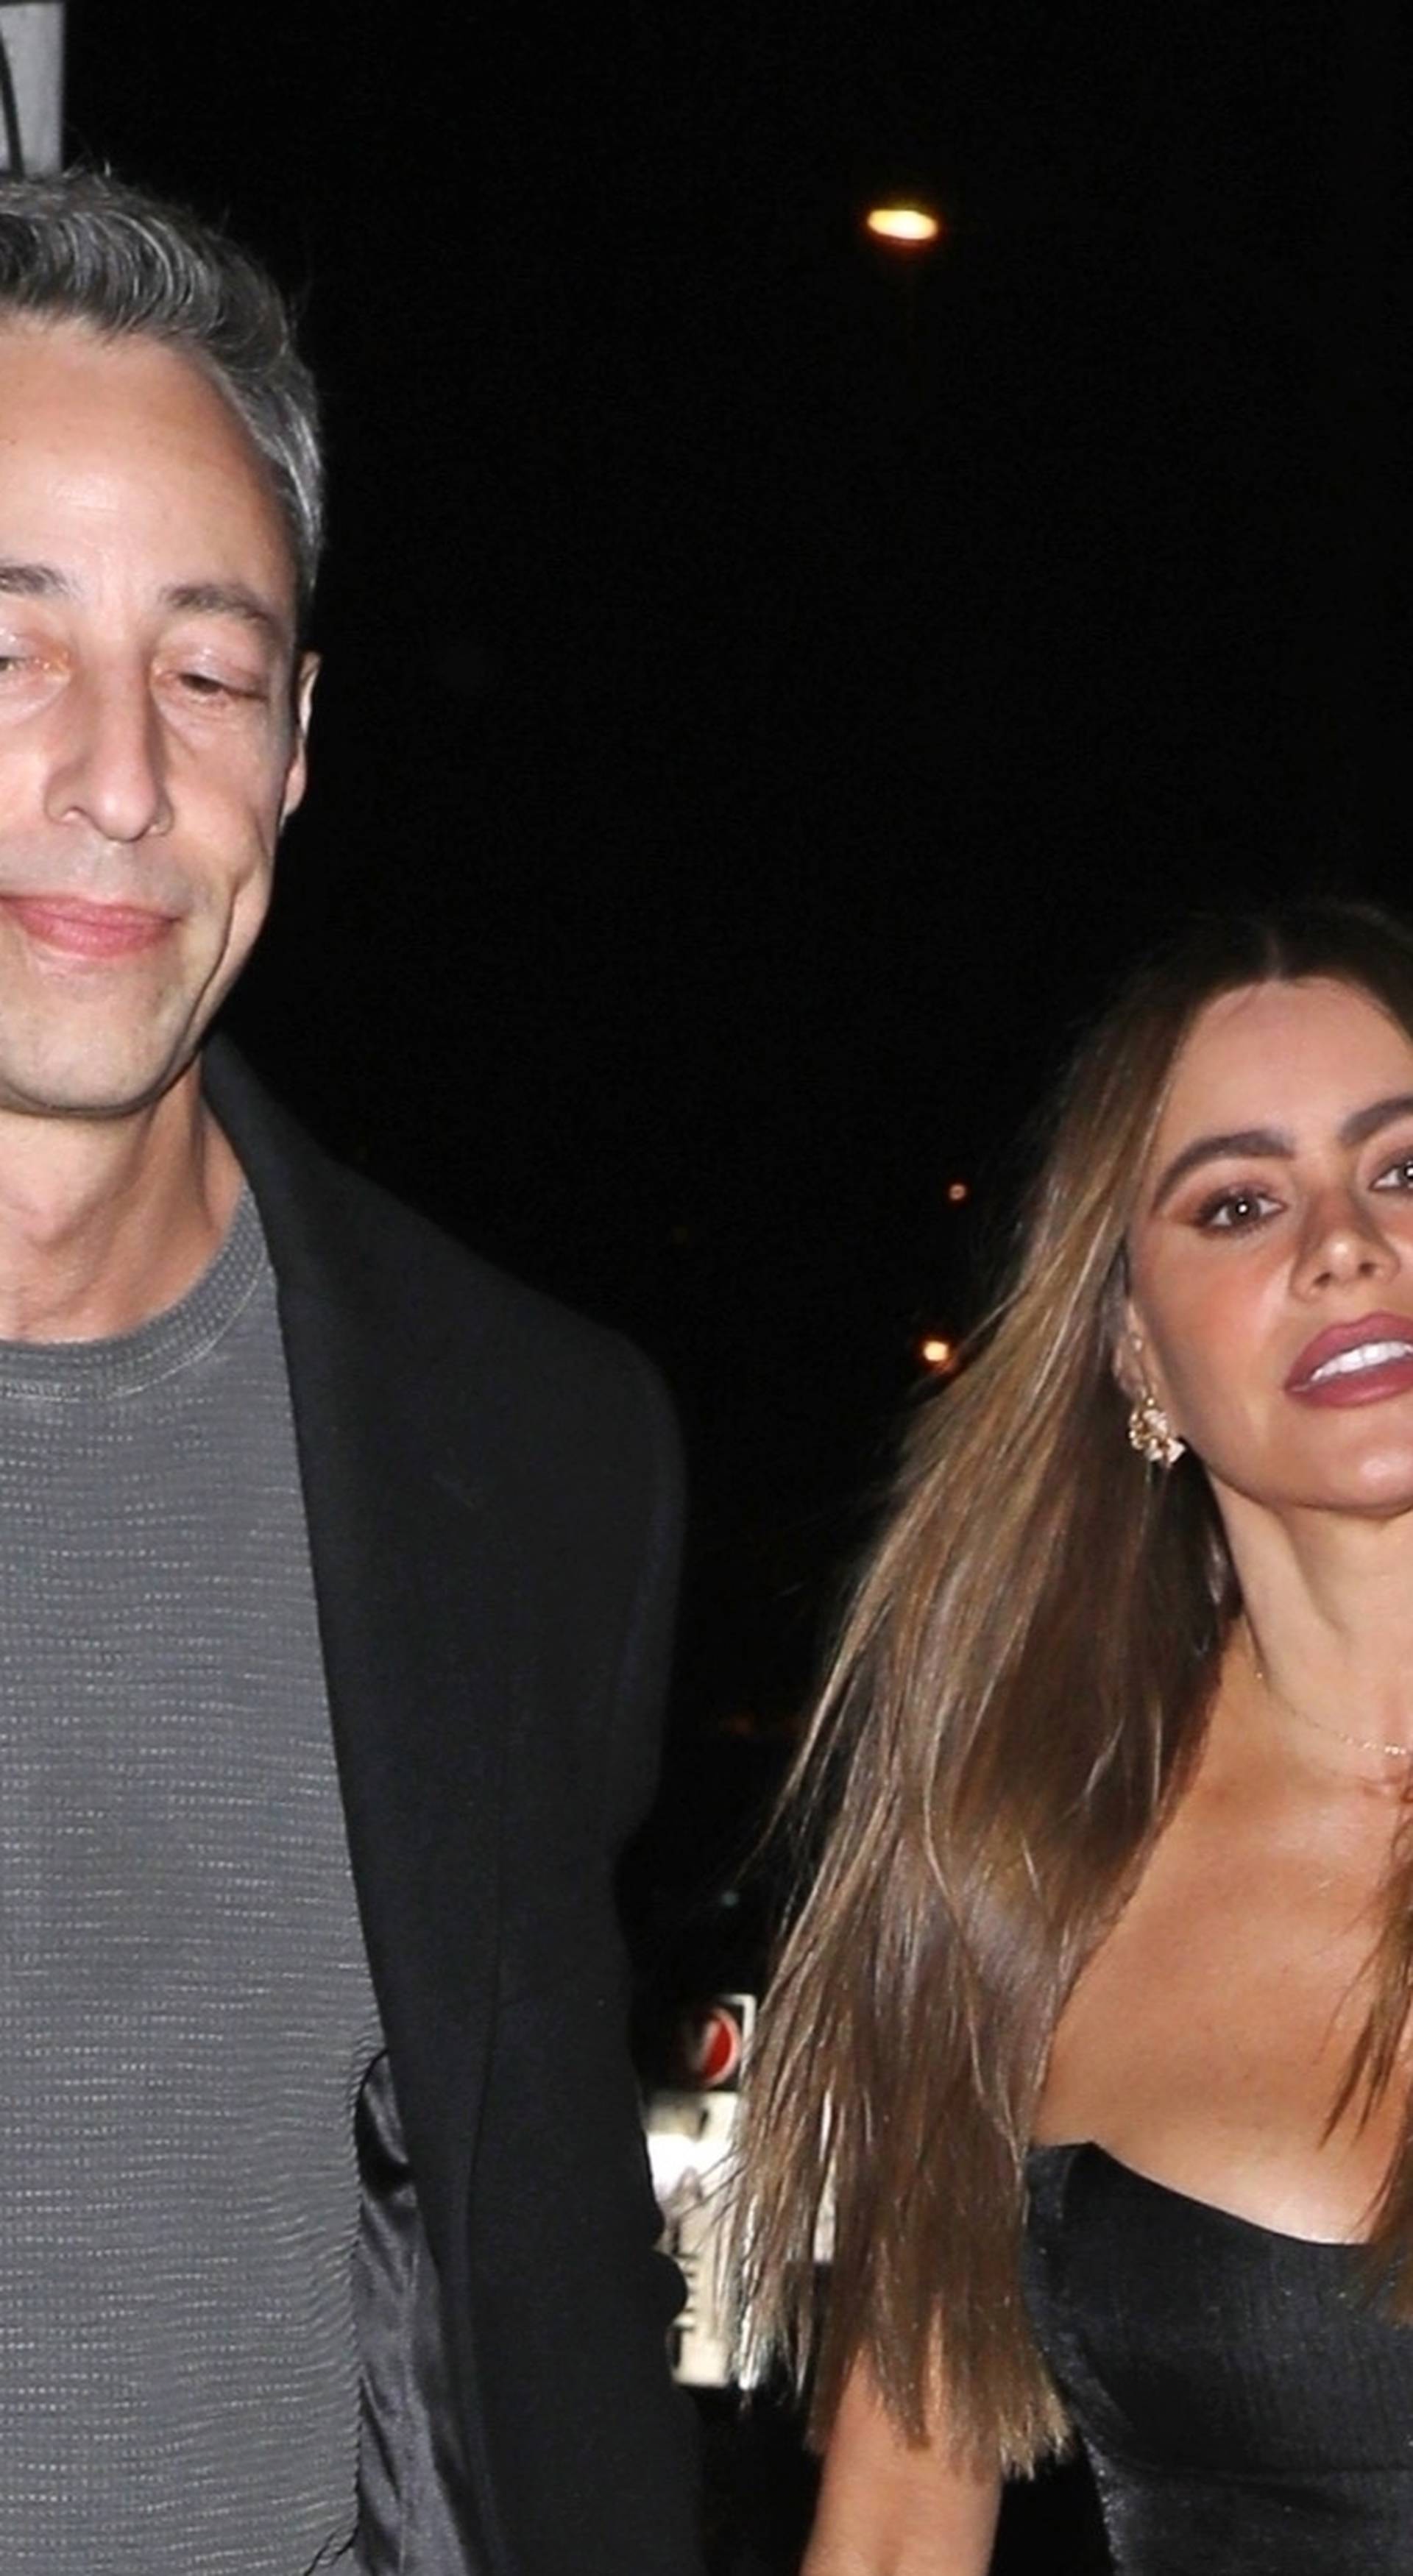 *EXCLUSIVE* Sofia Vergara and new boyfriend Justin Saliman head out for a romantic dinner date in Santa Monica!